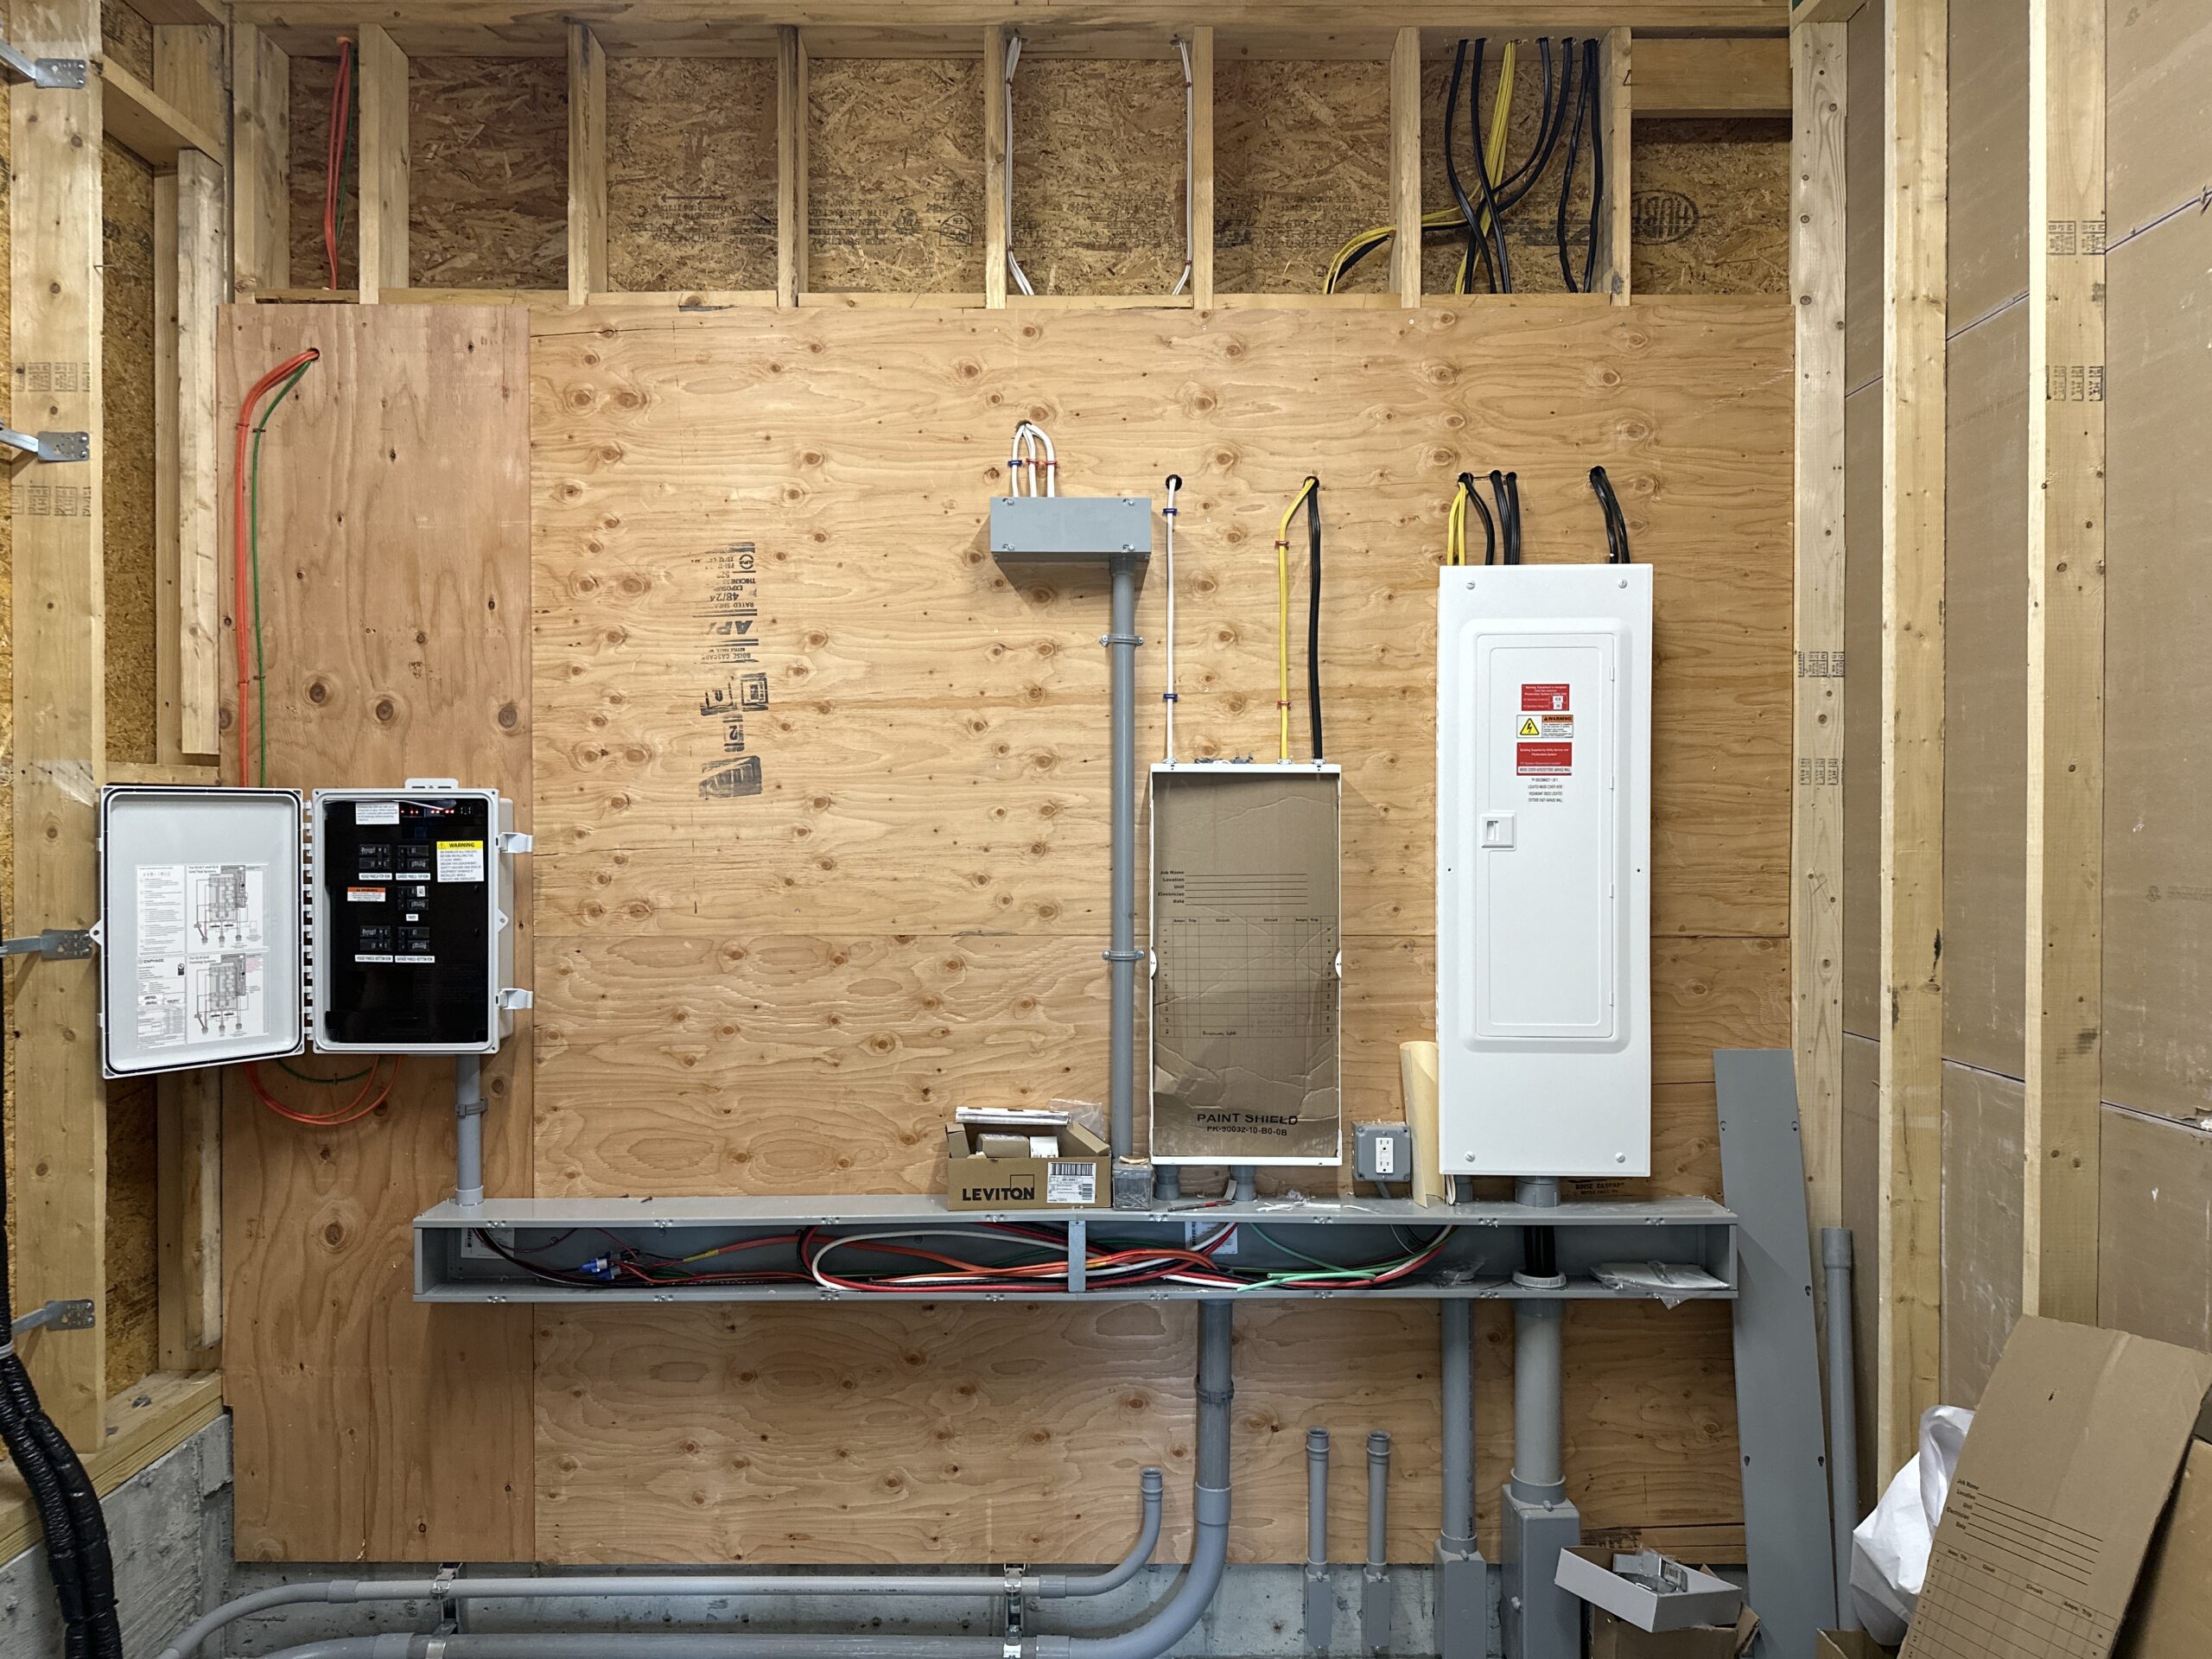 an image of an electrical utility room under construction.